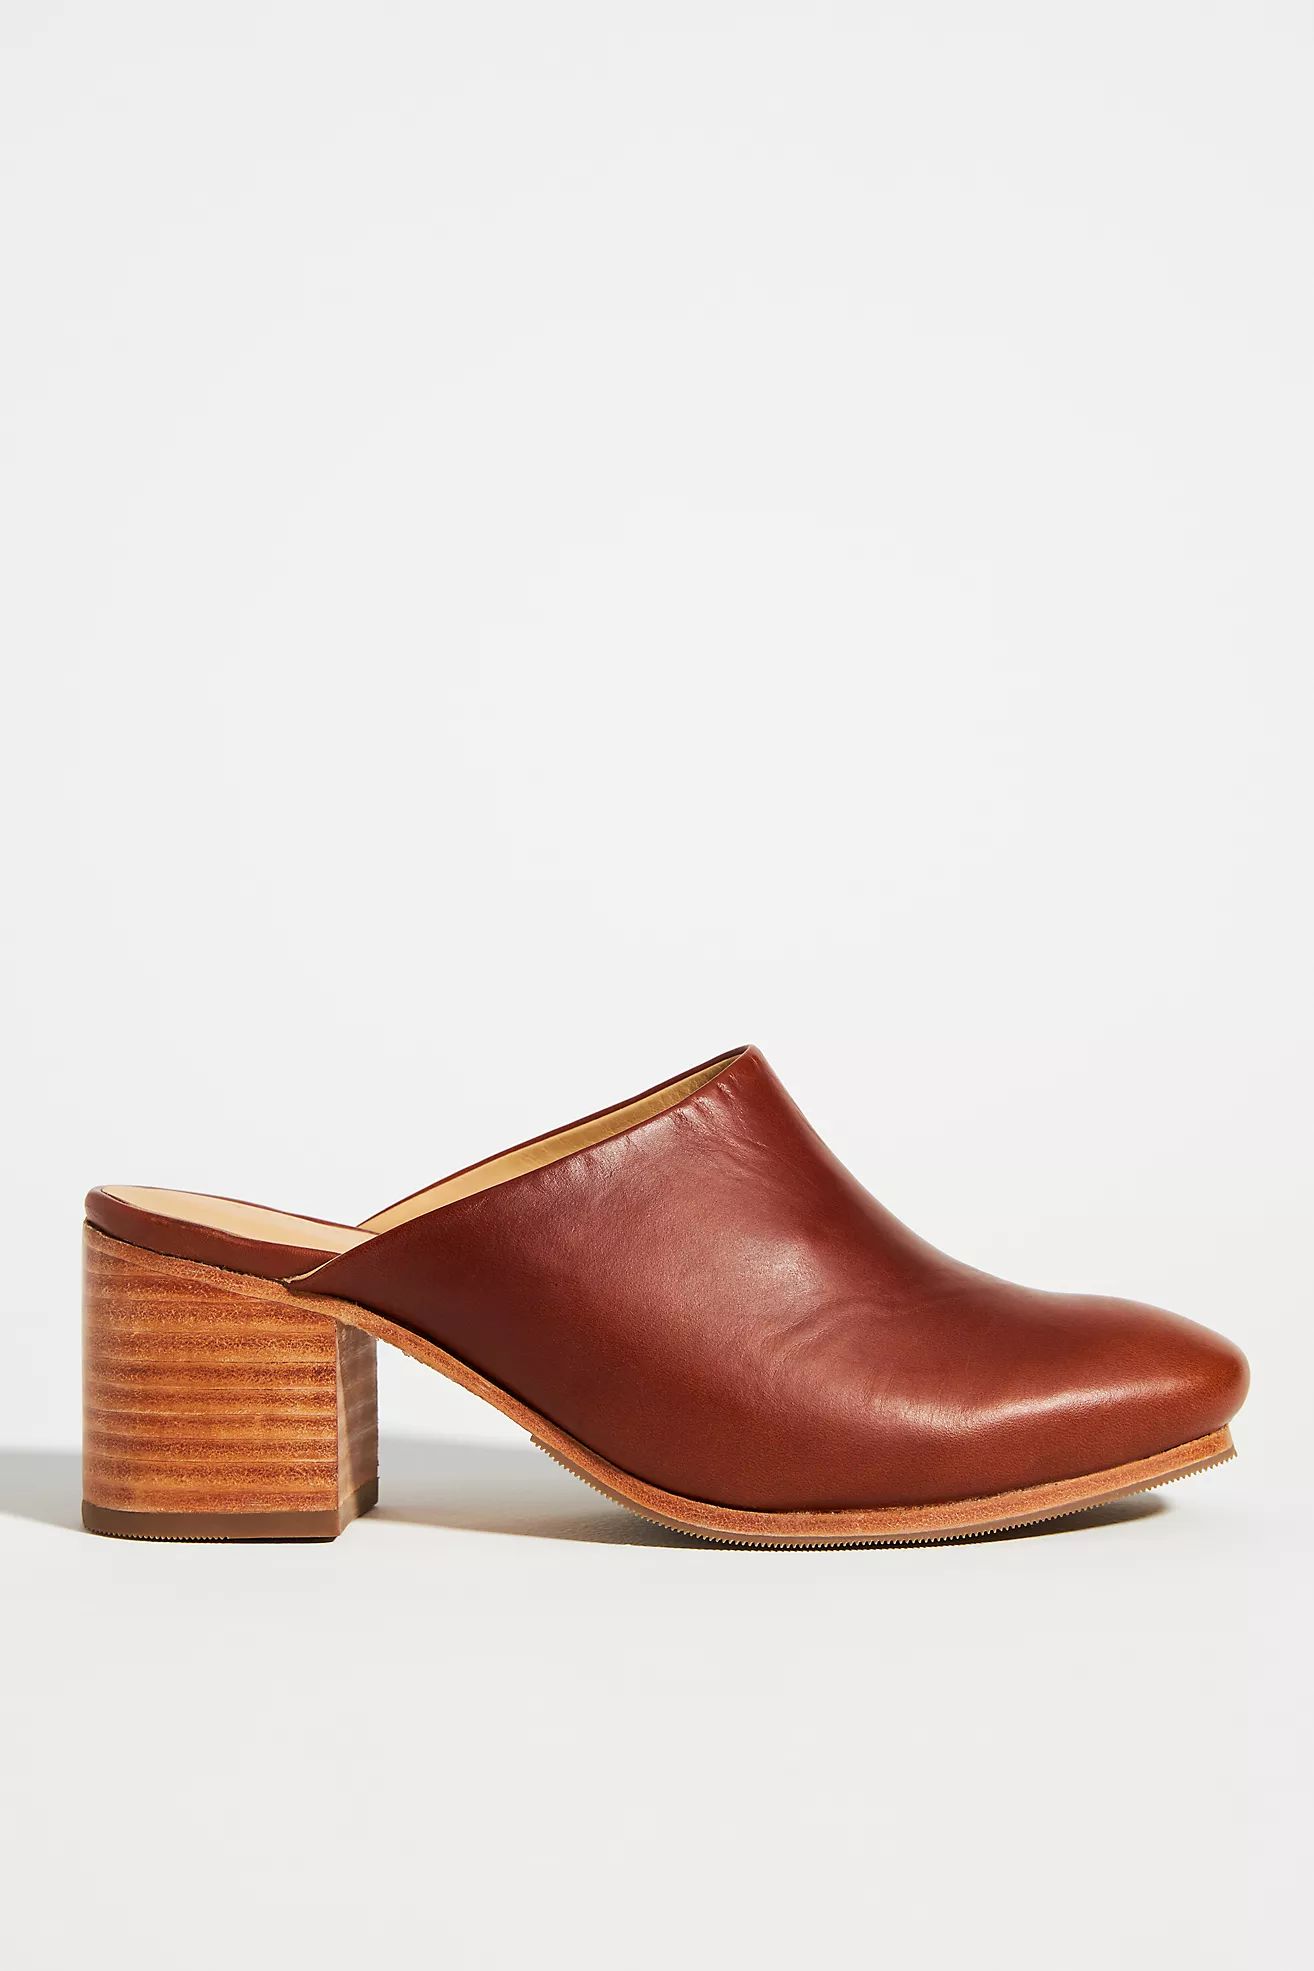 Nisolo All-Day Heeled Mules | Anthropologie (US)